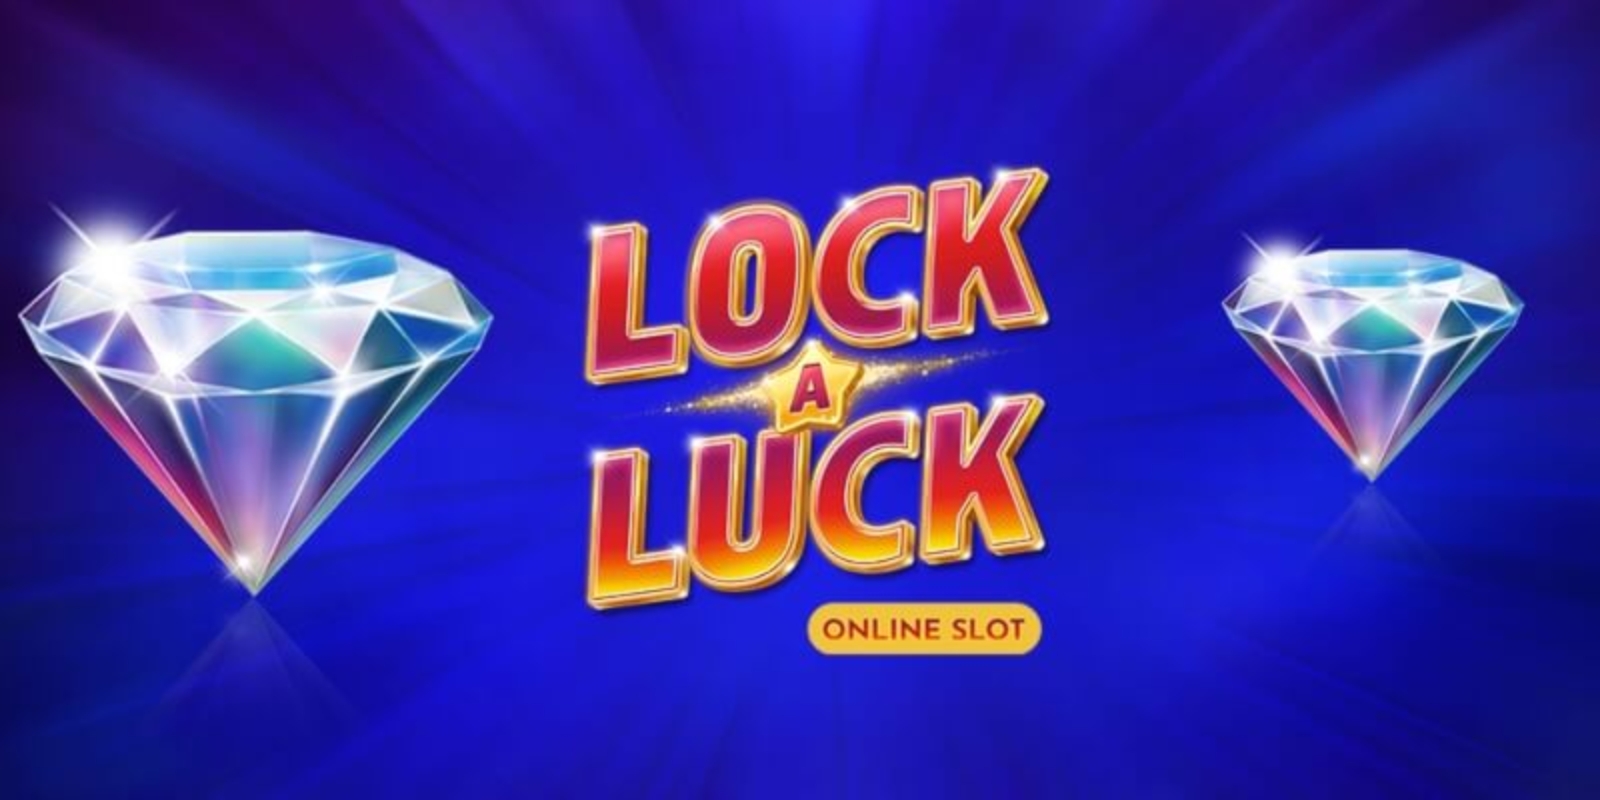 The Lock A Luck Online Slot Demo Game by All41 Studios